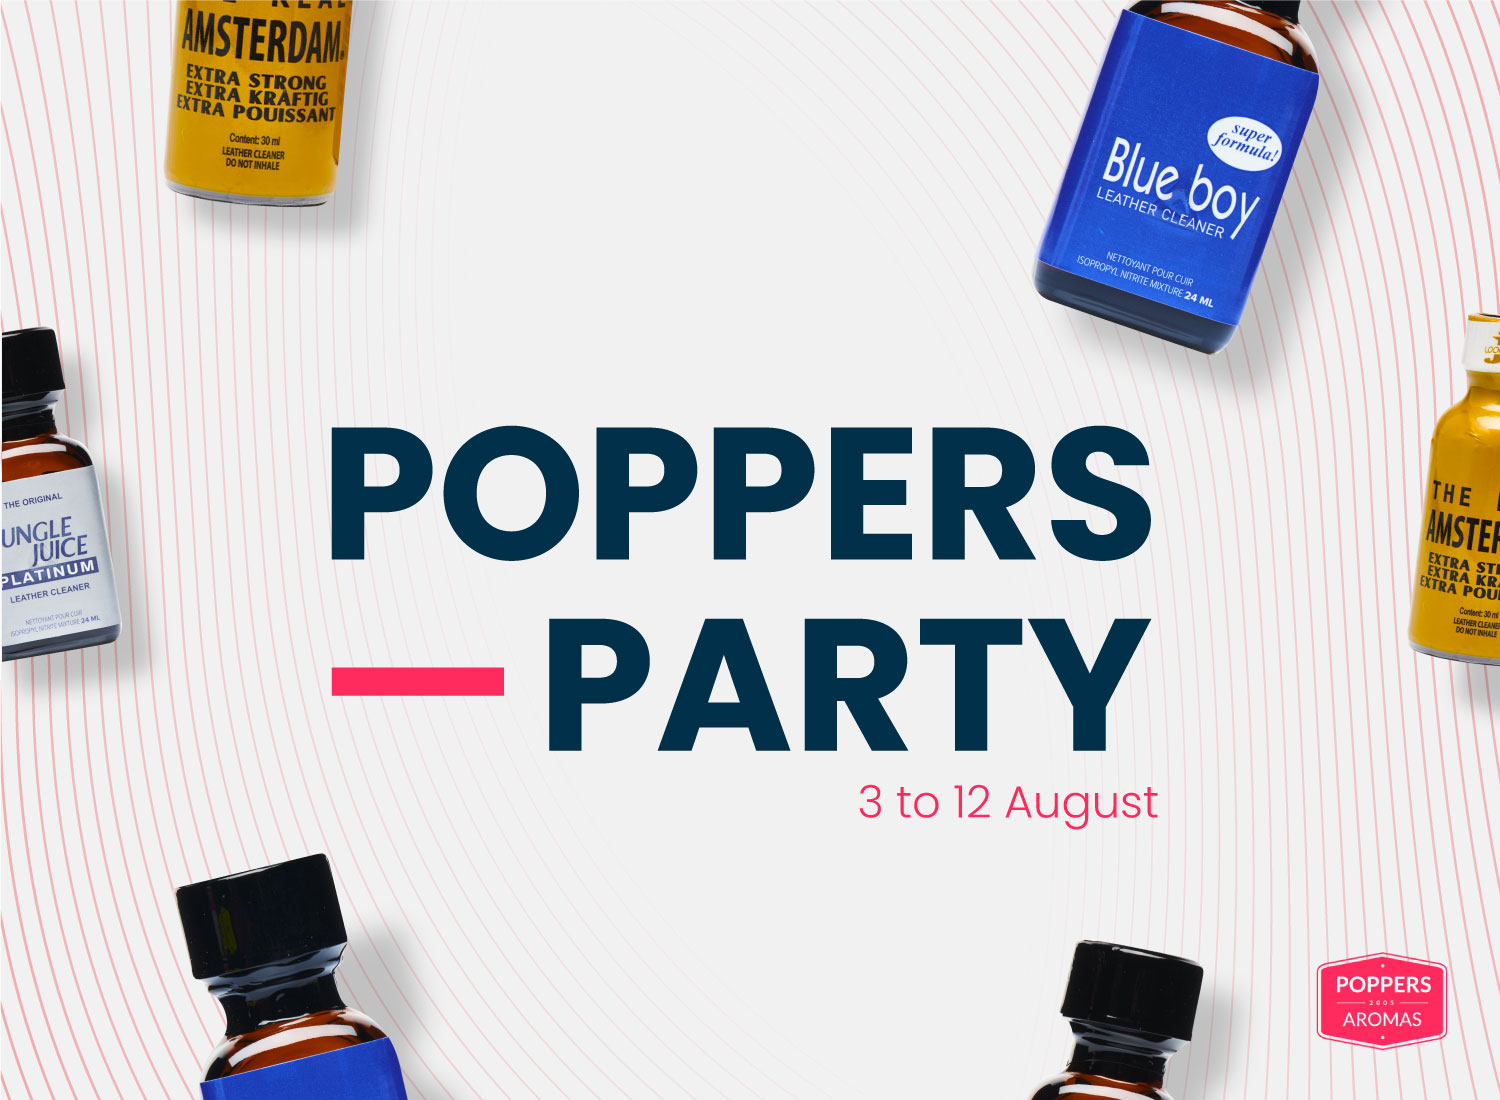 You are currently viewing Poppers party, from 3 to 12 August